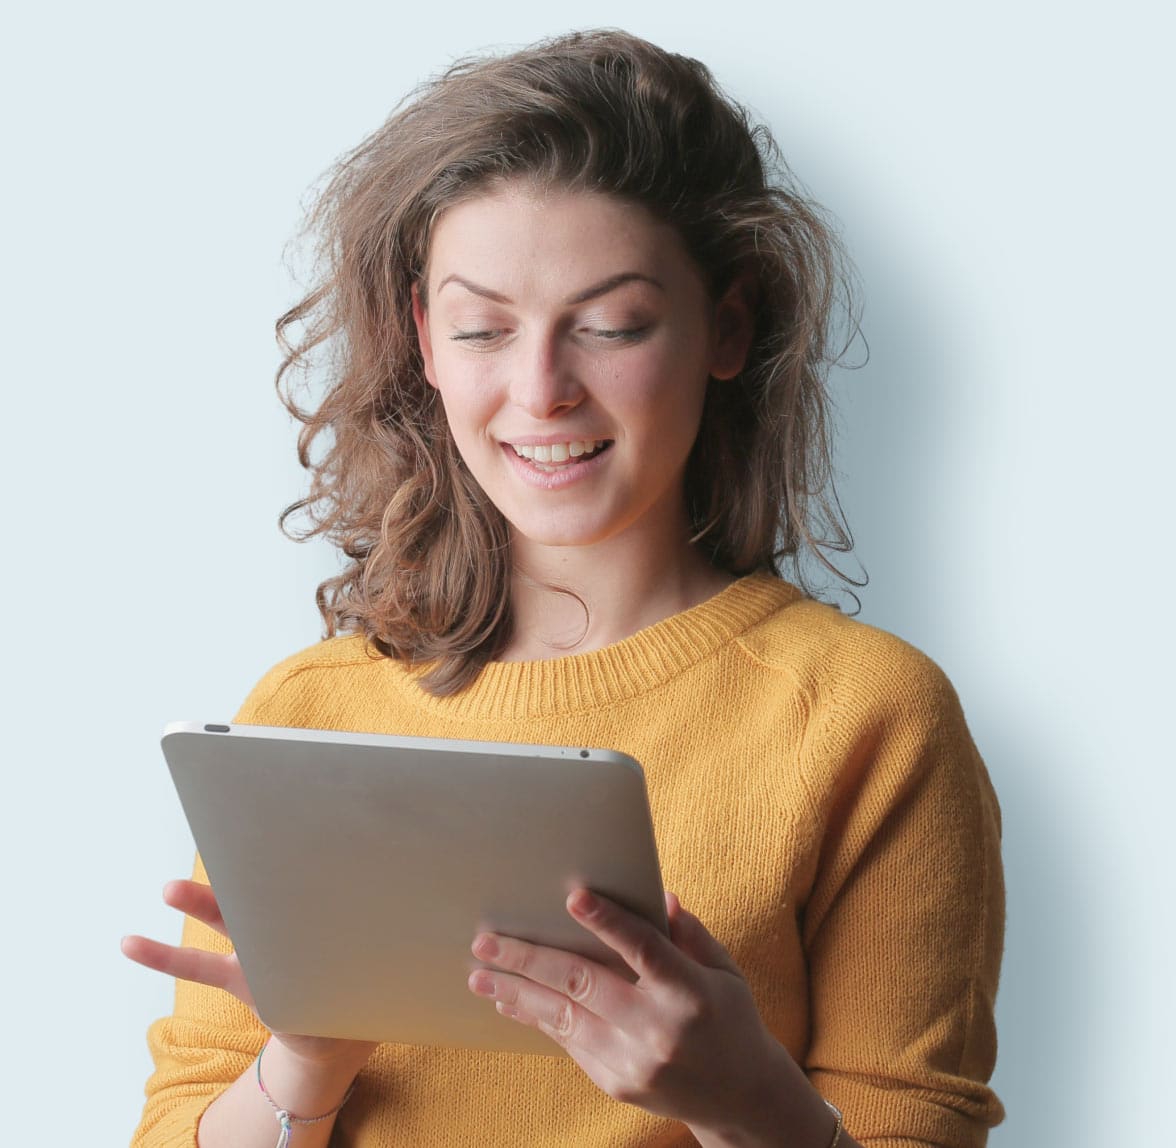 A person with wavy brown hair is smiling while looking at a tablet. They are wearing a yellow sweater and standing against a light blue background.